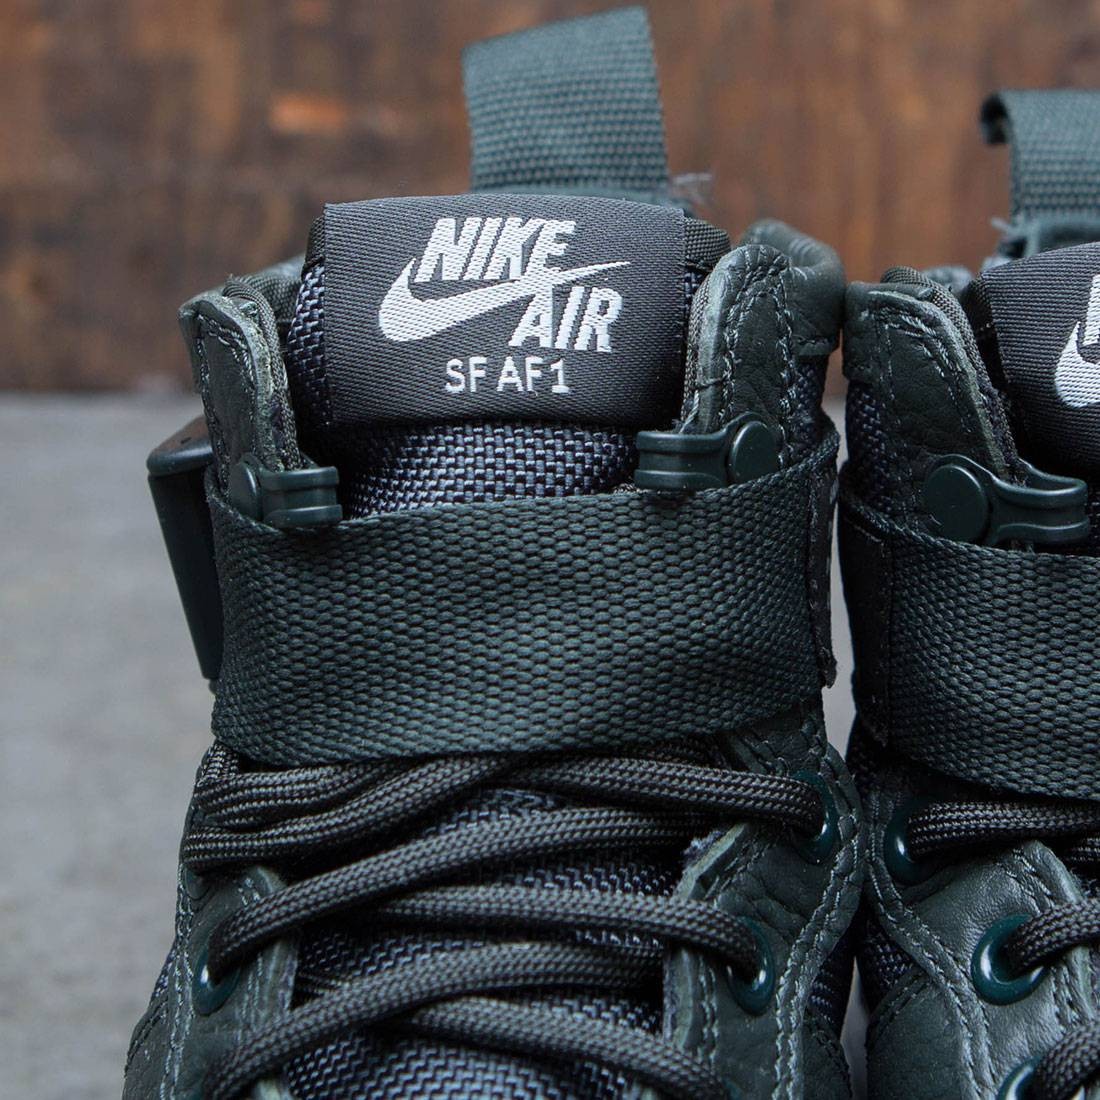 air force 1 mid olive green